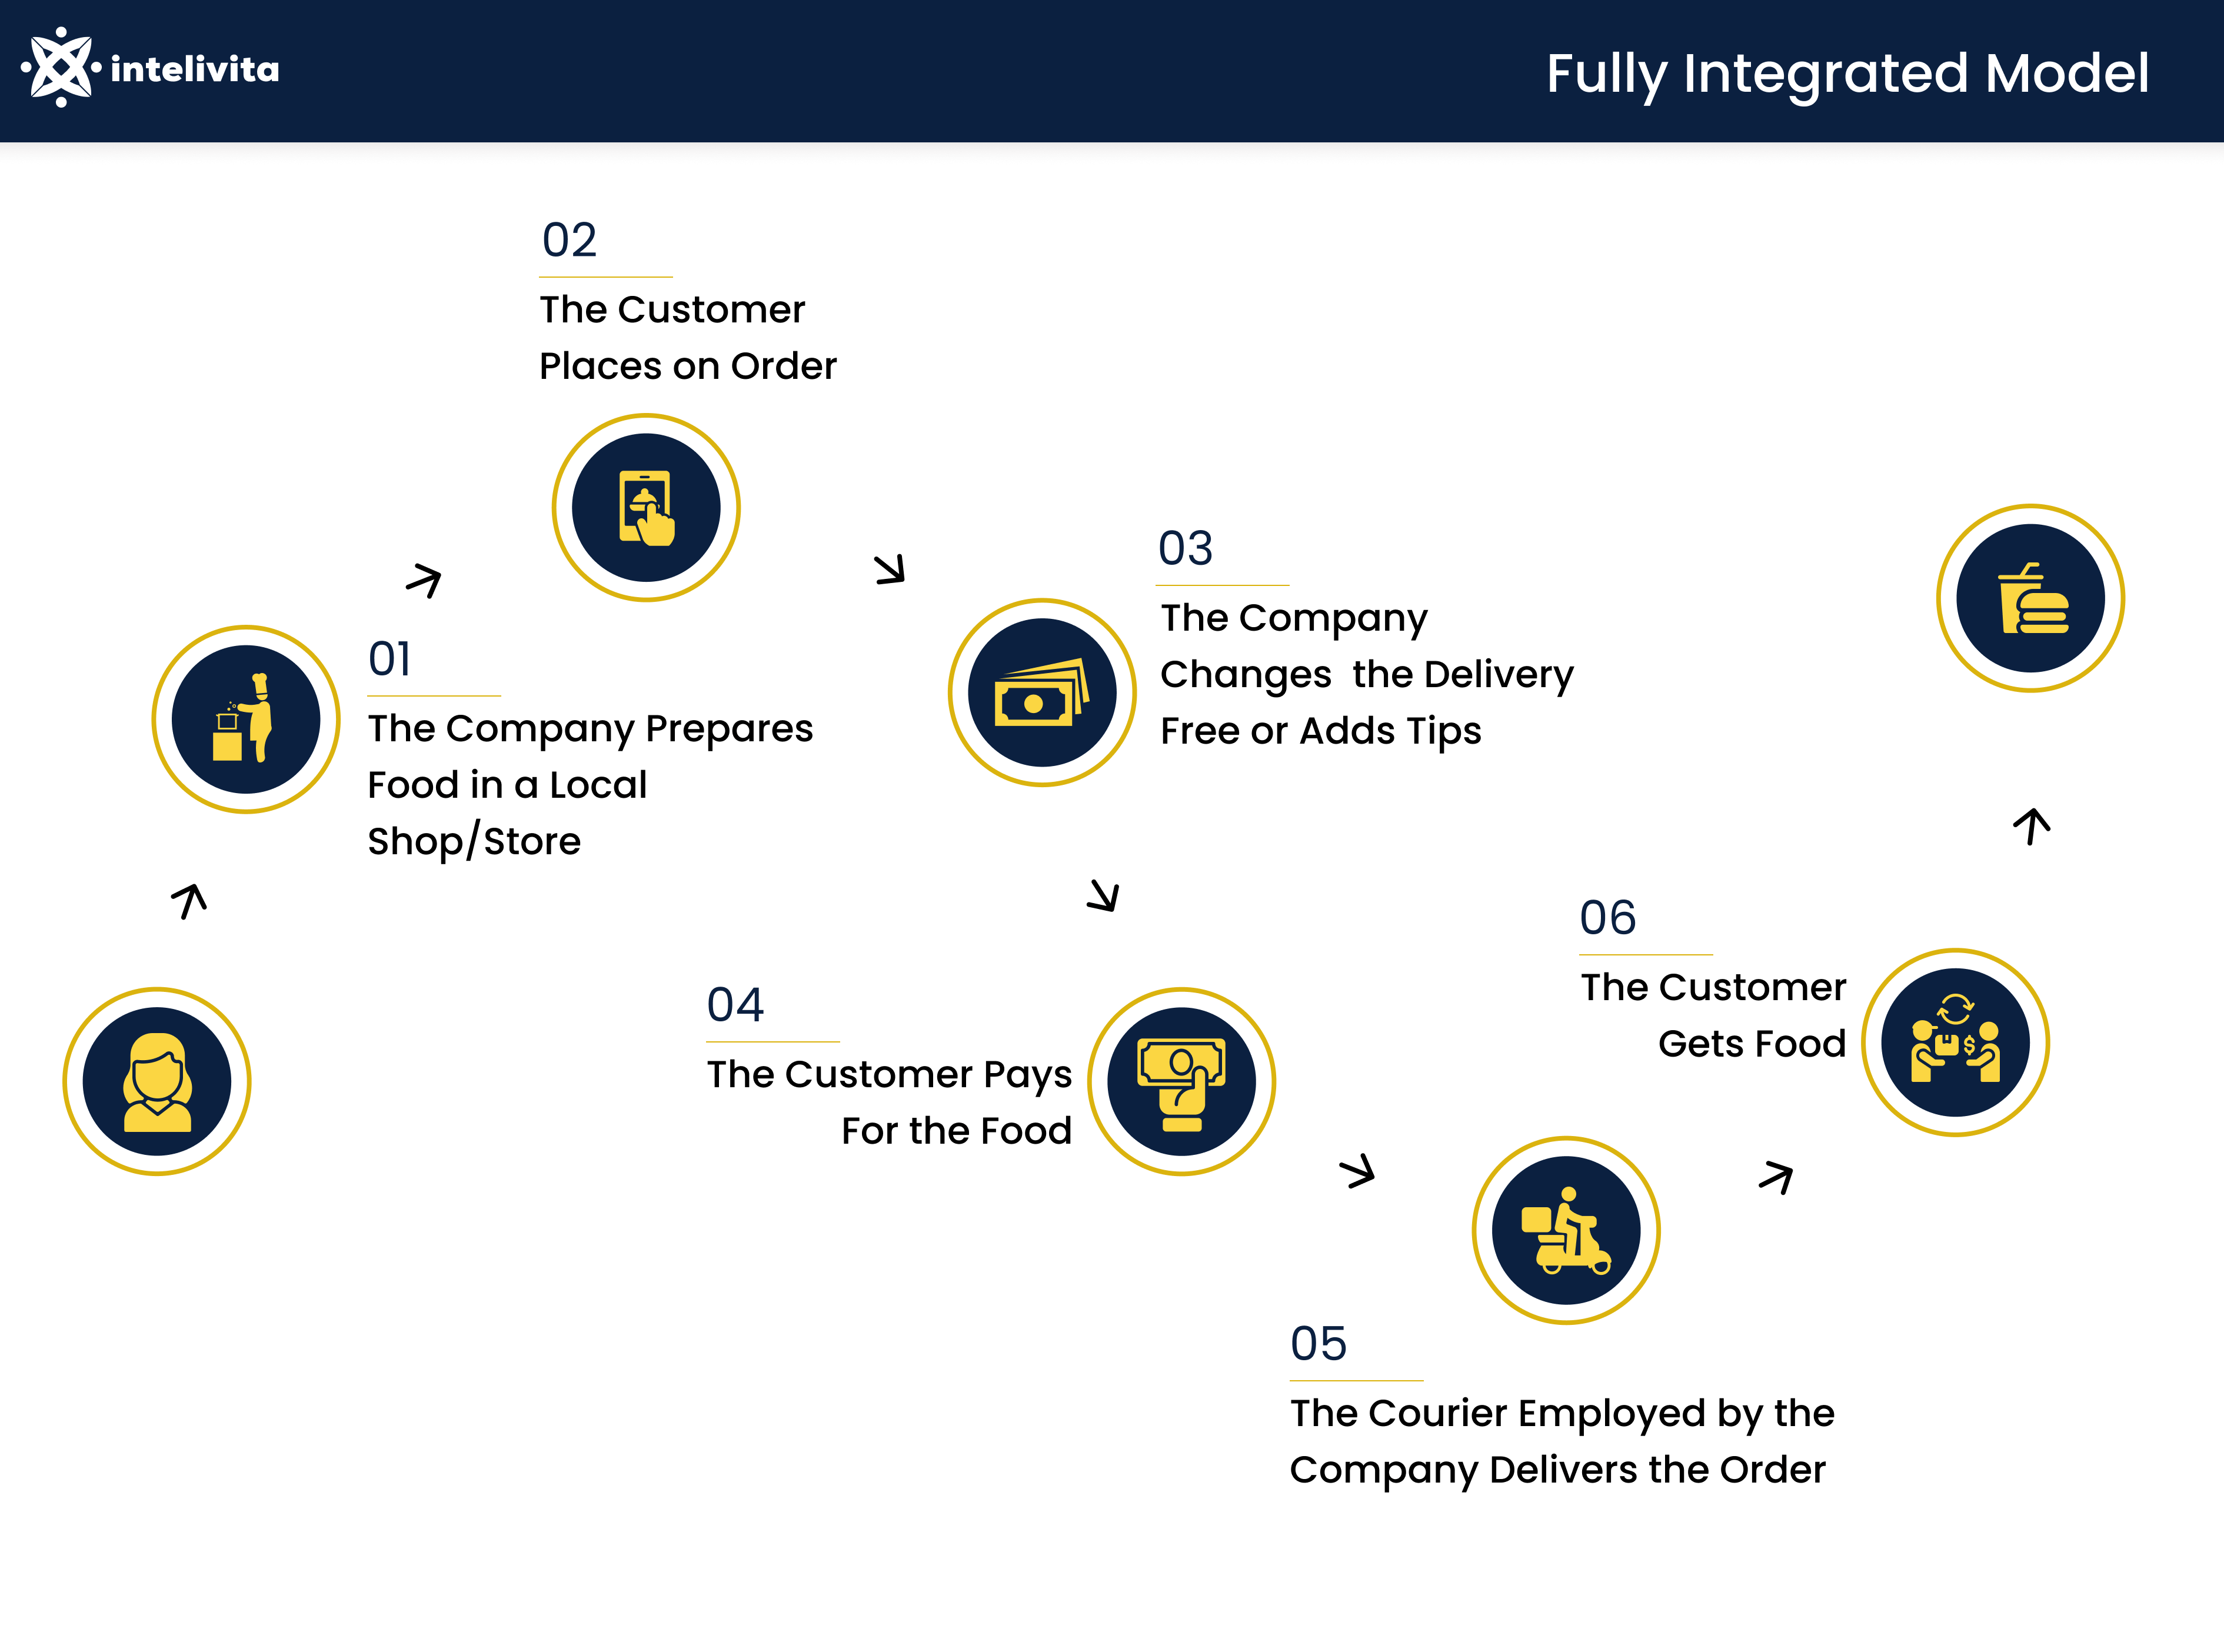 Image depicting Full-Integrated delivery model.